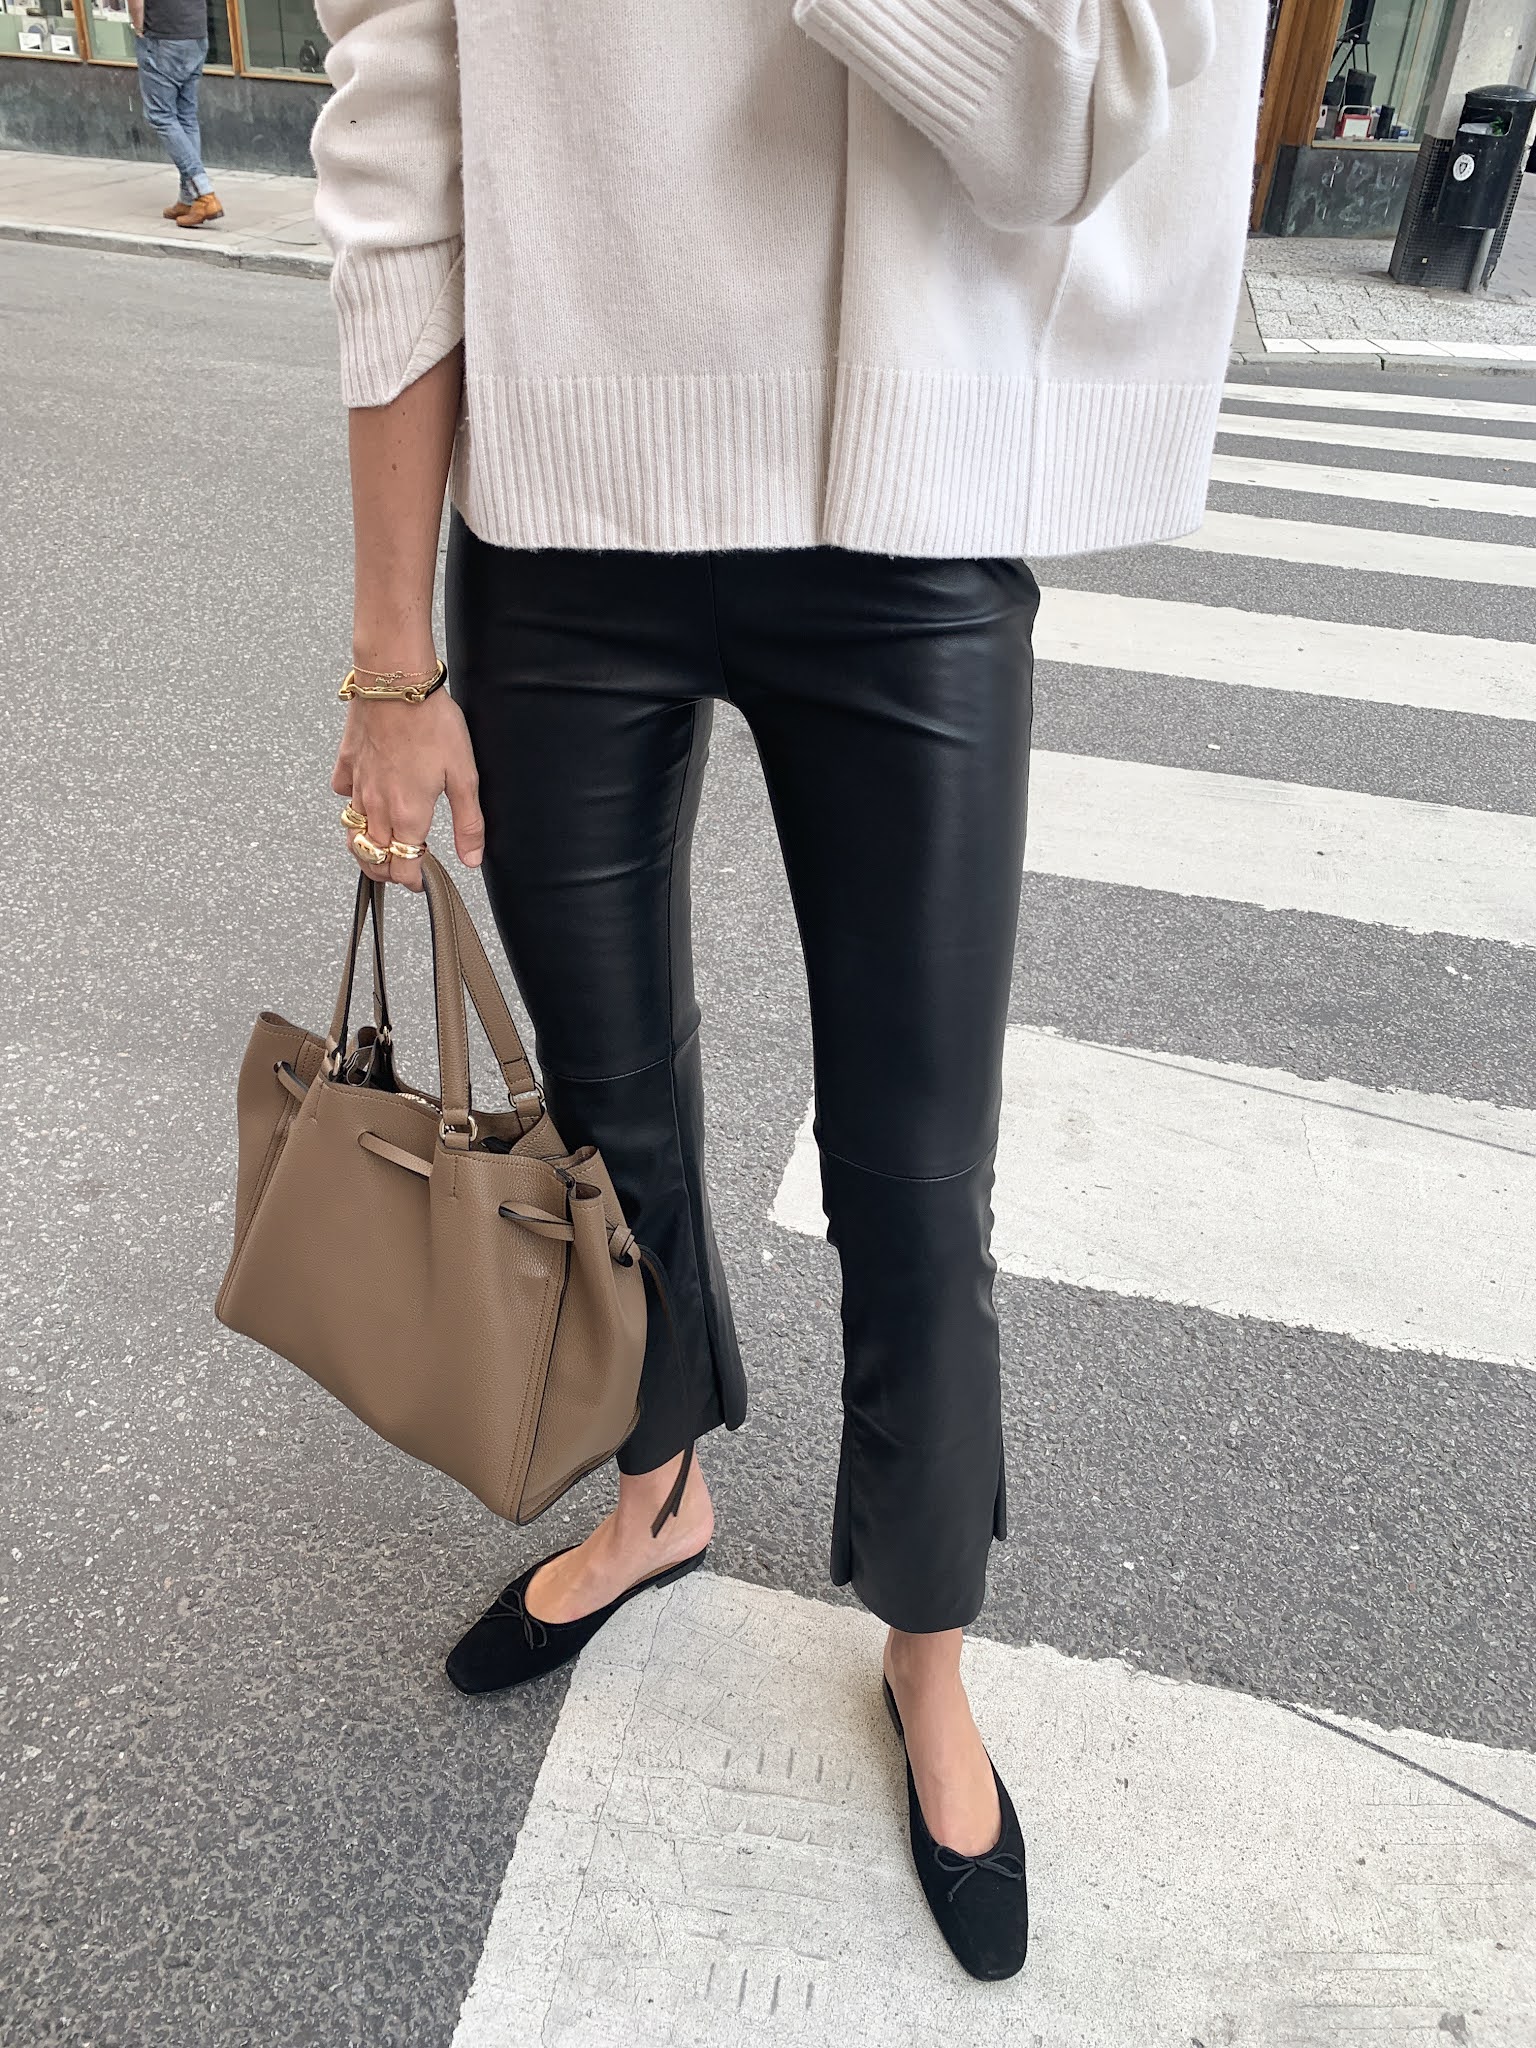 Best Black Flats — Fall outfit idea with a cream sweatre, leather pants, and Manolo Blahnik mule flats